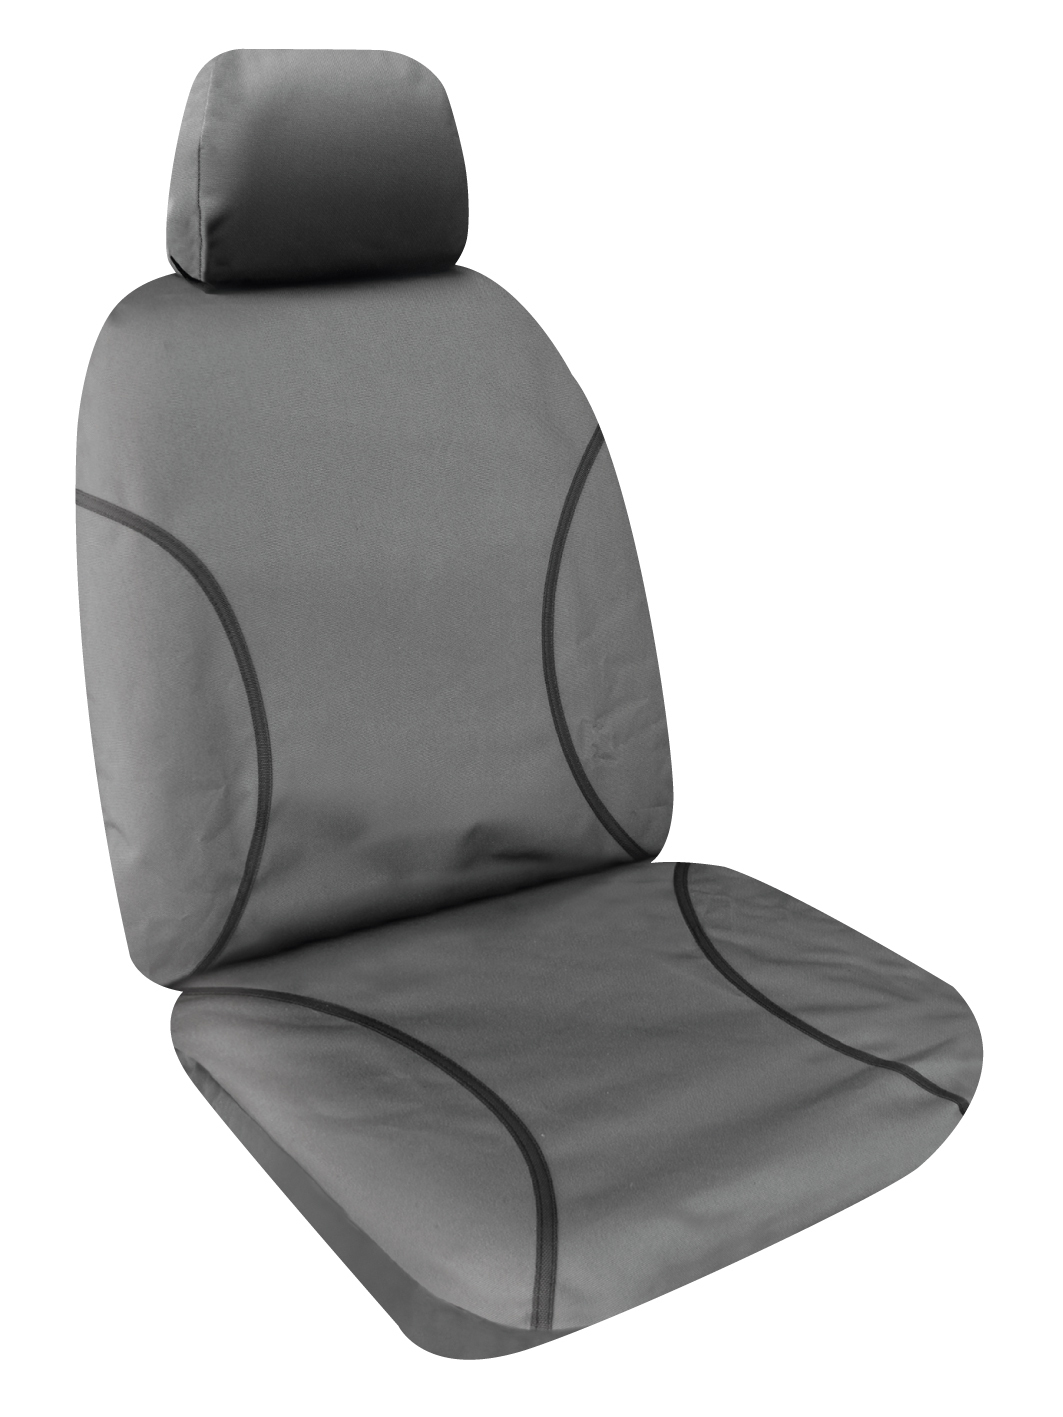 SPERLING SEAT COVER FRONT TRG (TRADIES CANVAS GREY)